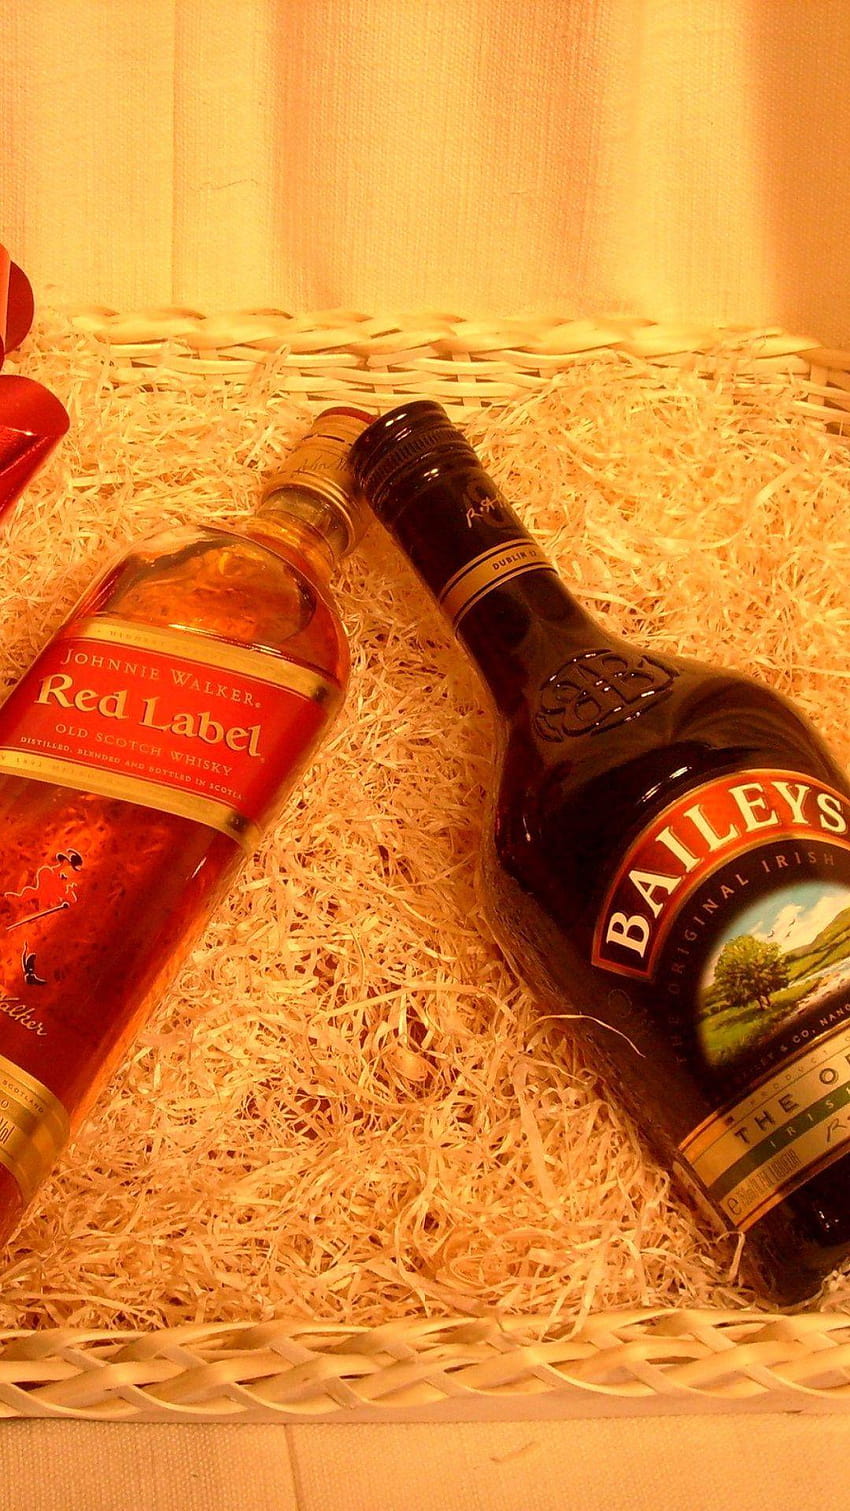 Baileys and red label iphone 6 HD phone wallpaper